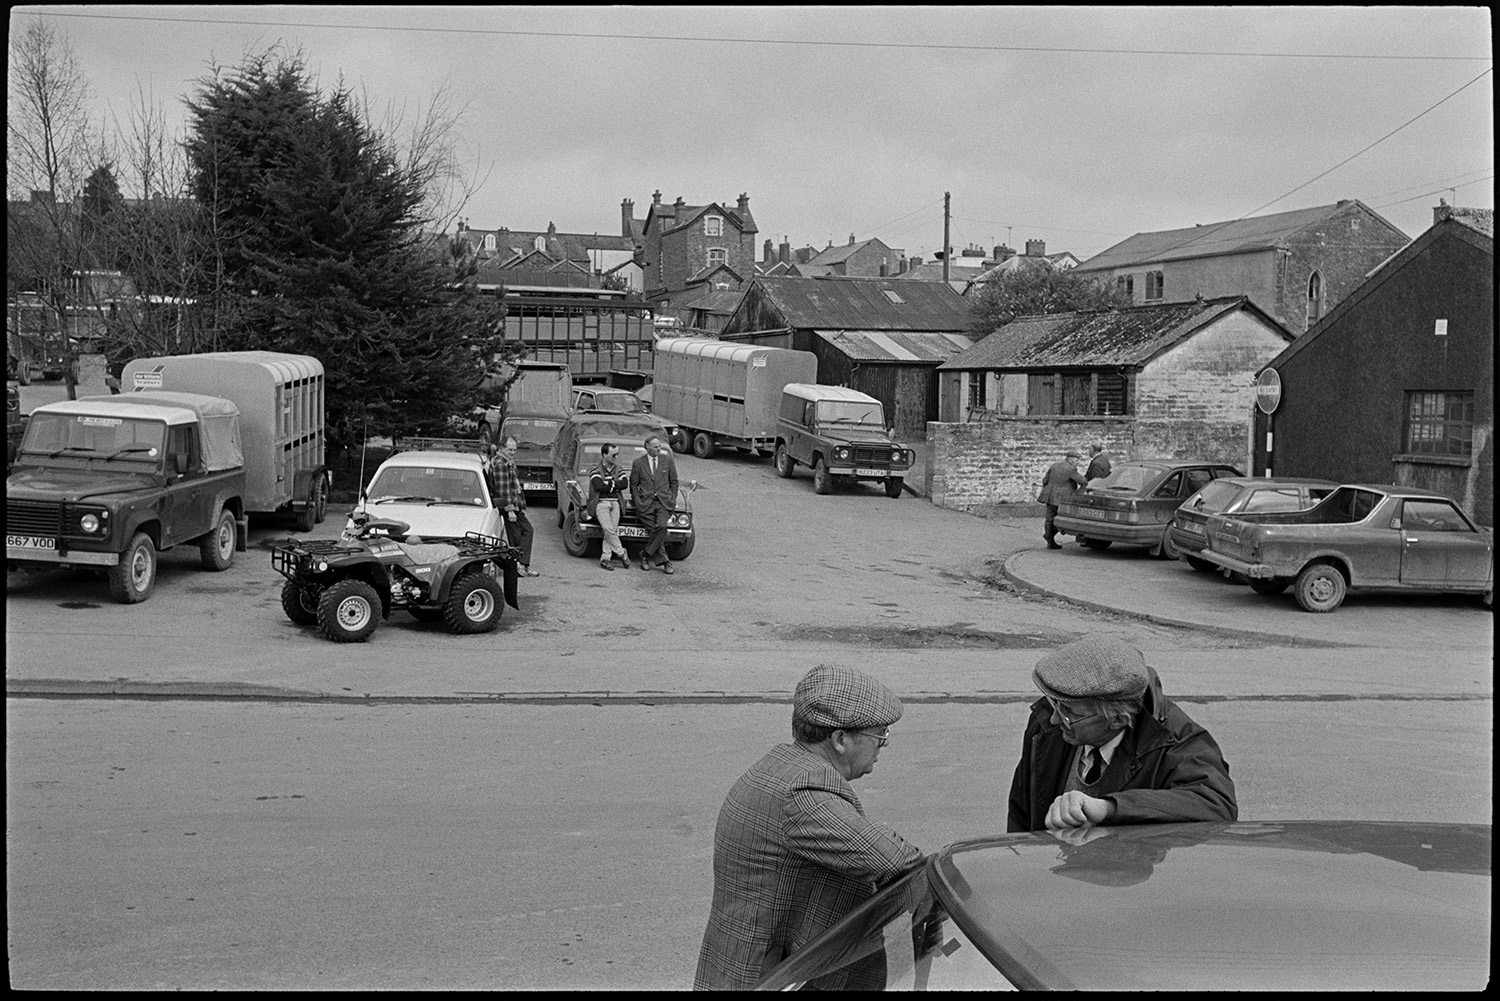 Market hall and cattle market, farmers chatting, loading cows on to trailer.
[Two men talking by a car outside the entrance to the cattle market at South Molton. There are a number of vehicles parked nearby, including quad bikes, jeeps, horse trailers and cattle lorries. Market buildings and houses are visible in the background.]